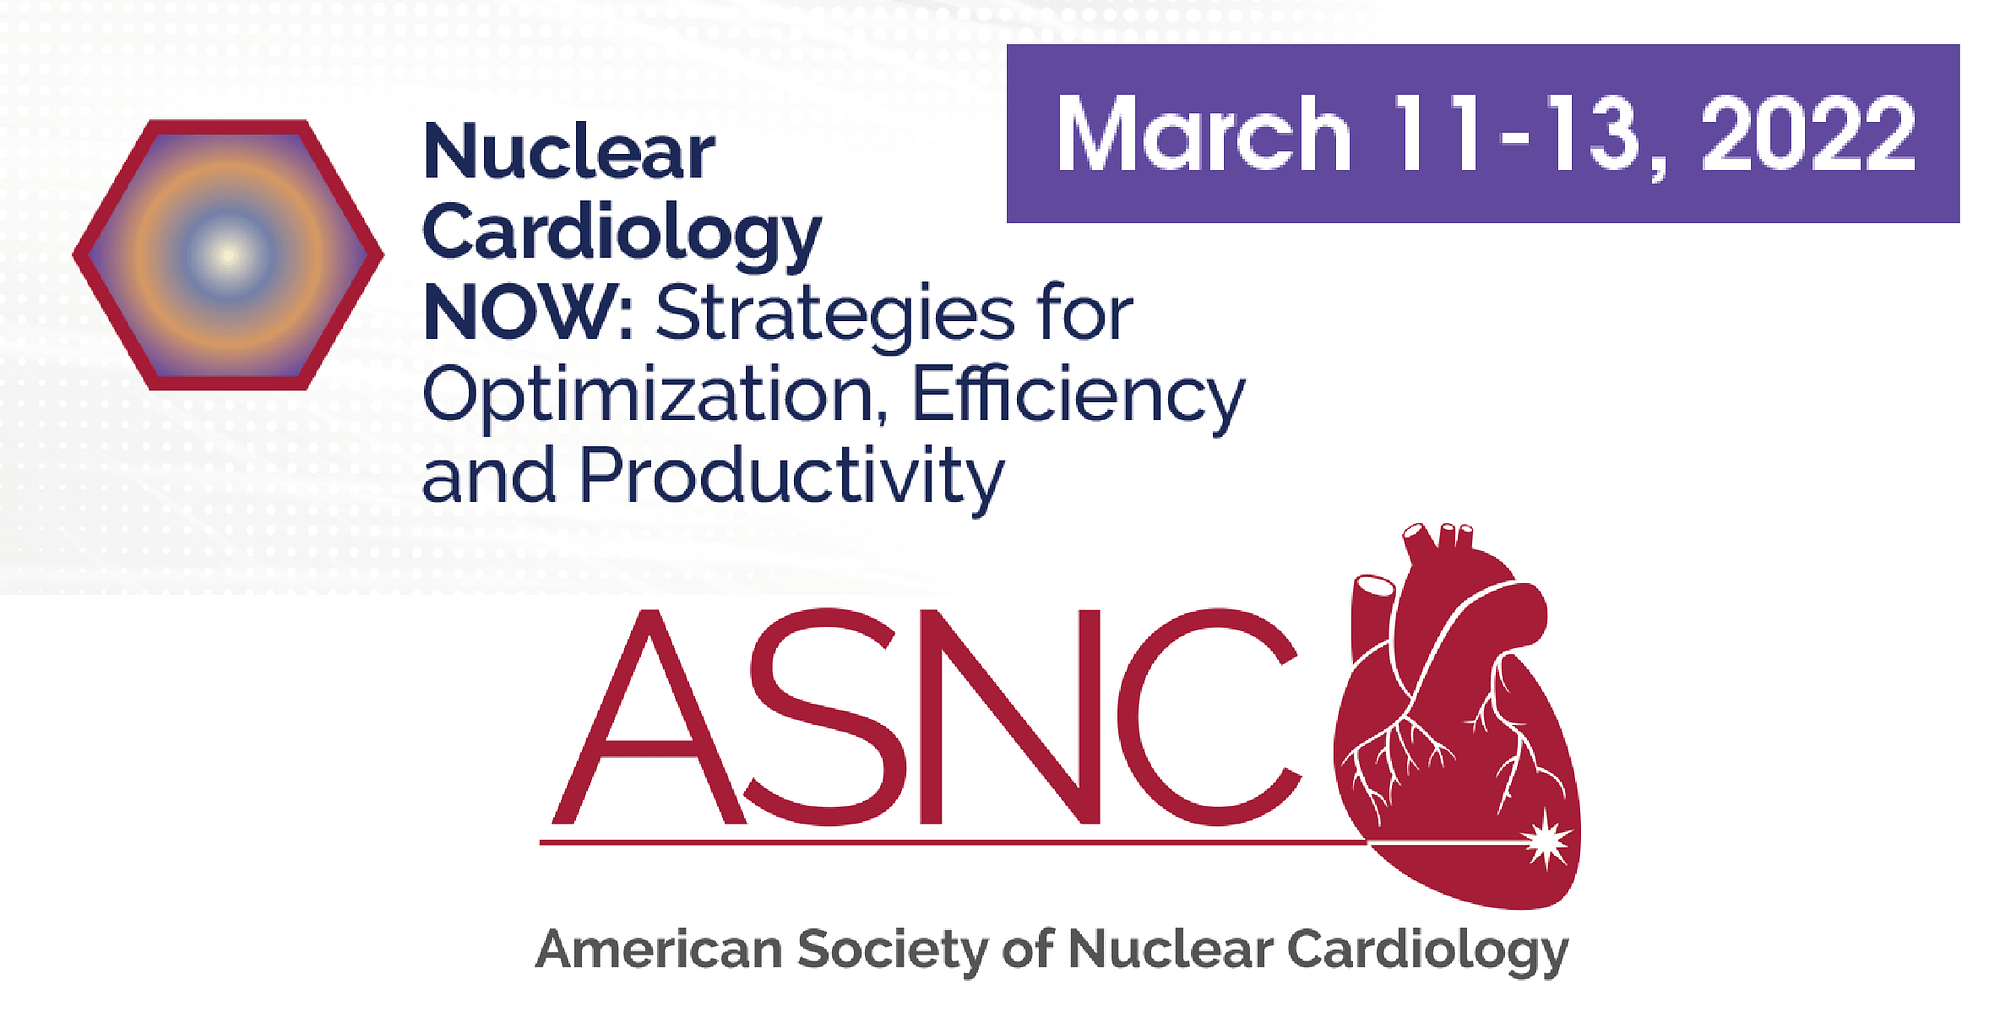 American Society of Nuclear Cardiology (ASNC) Nuclear Cardiology NOW Conference